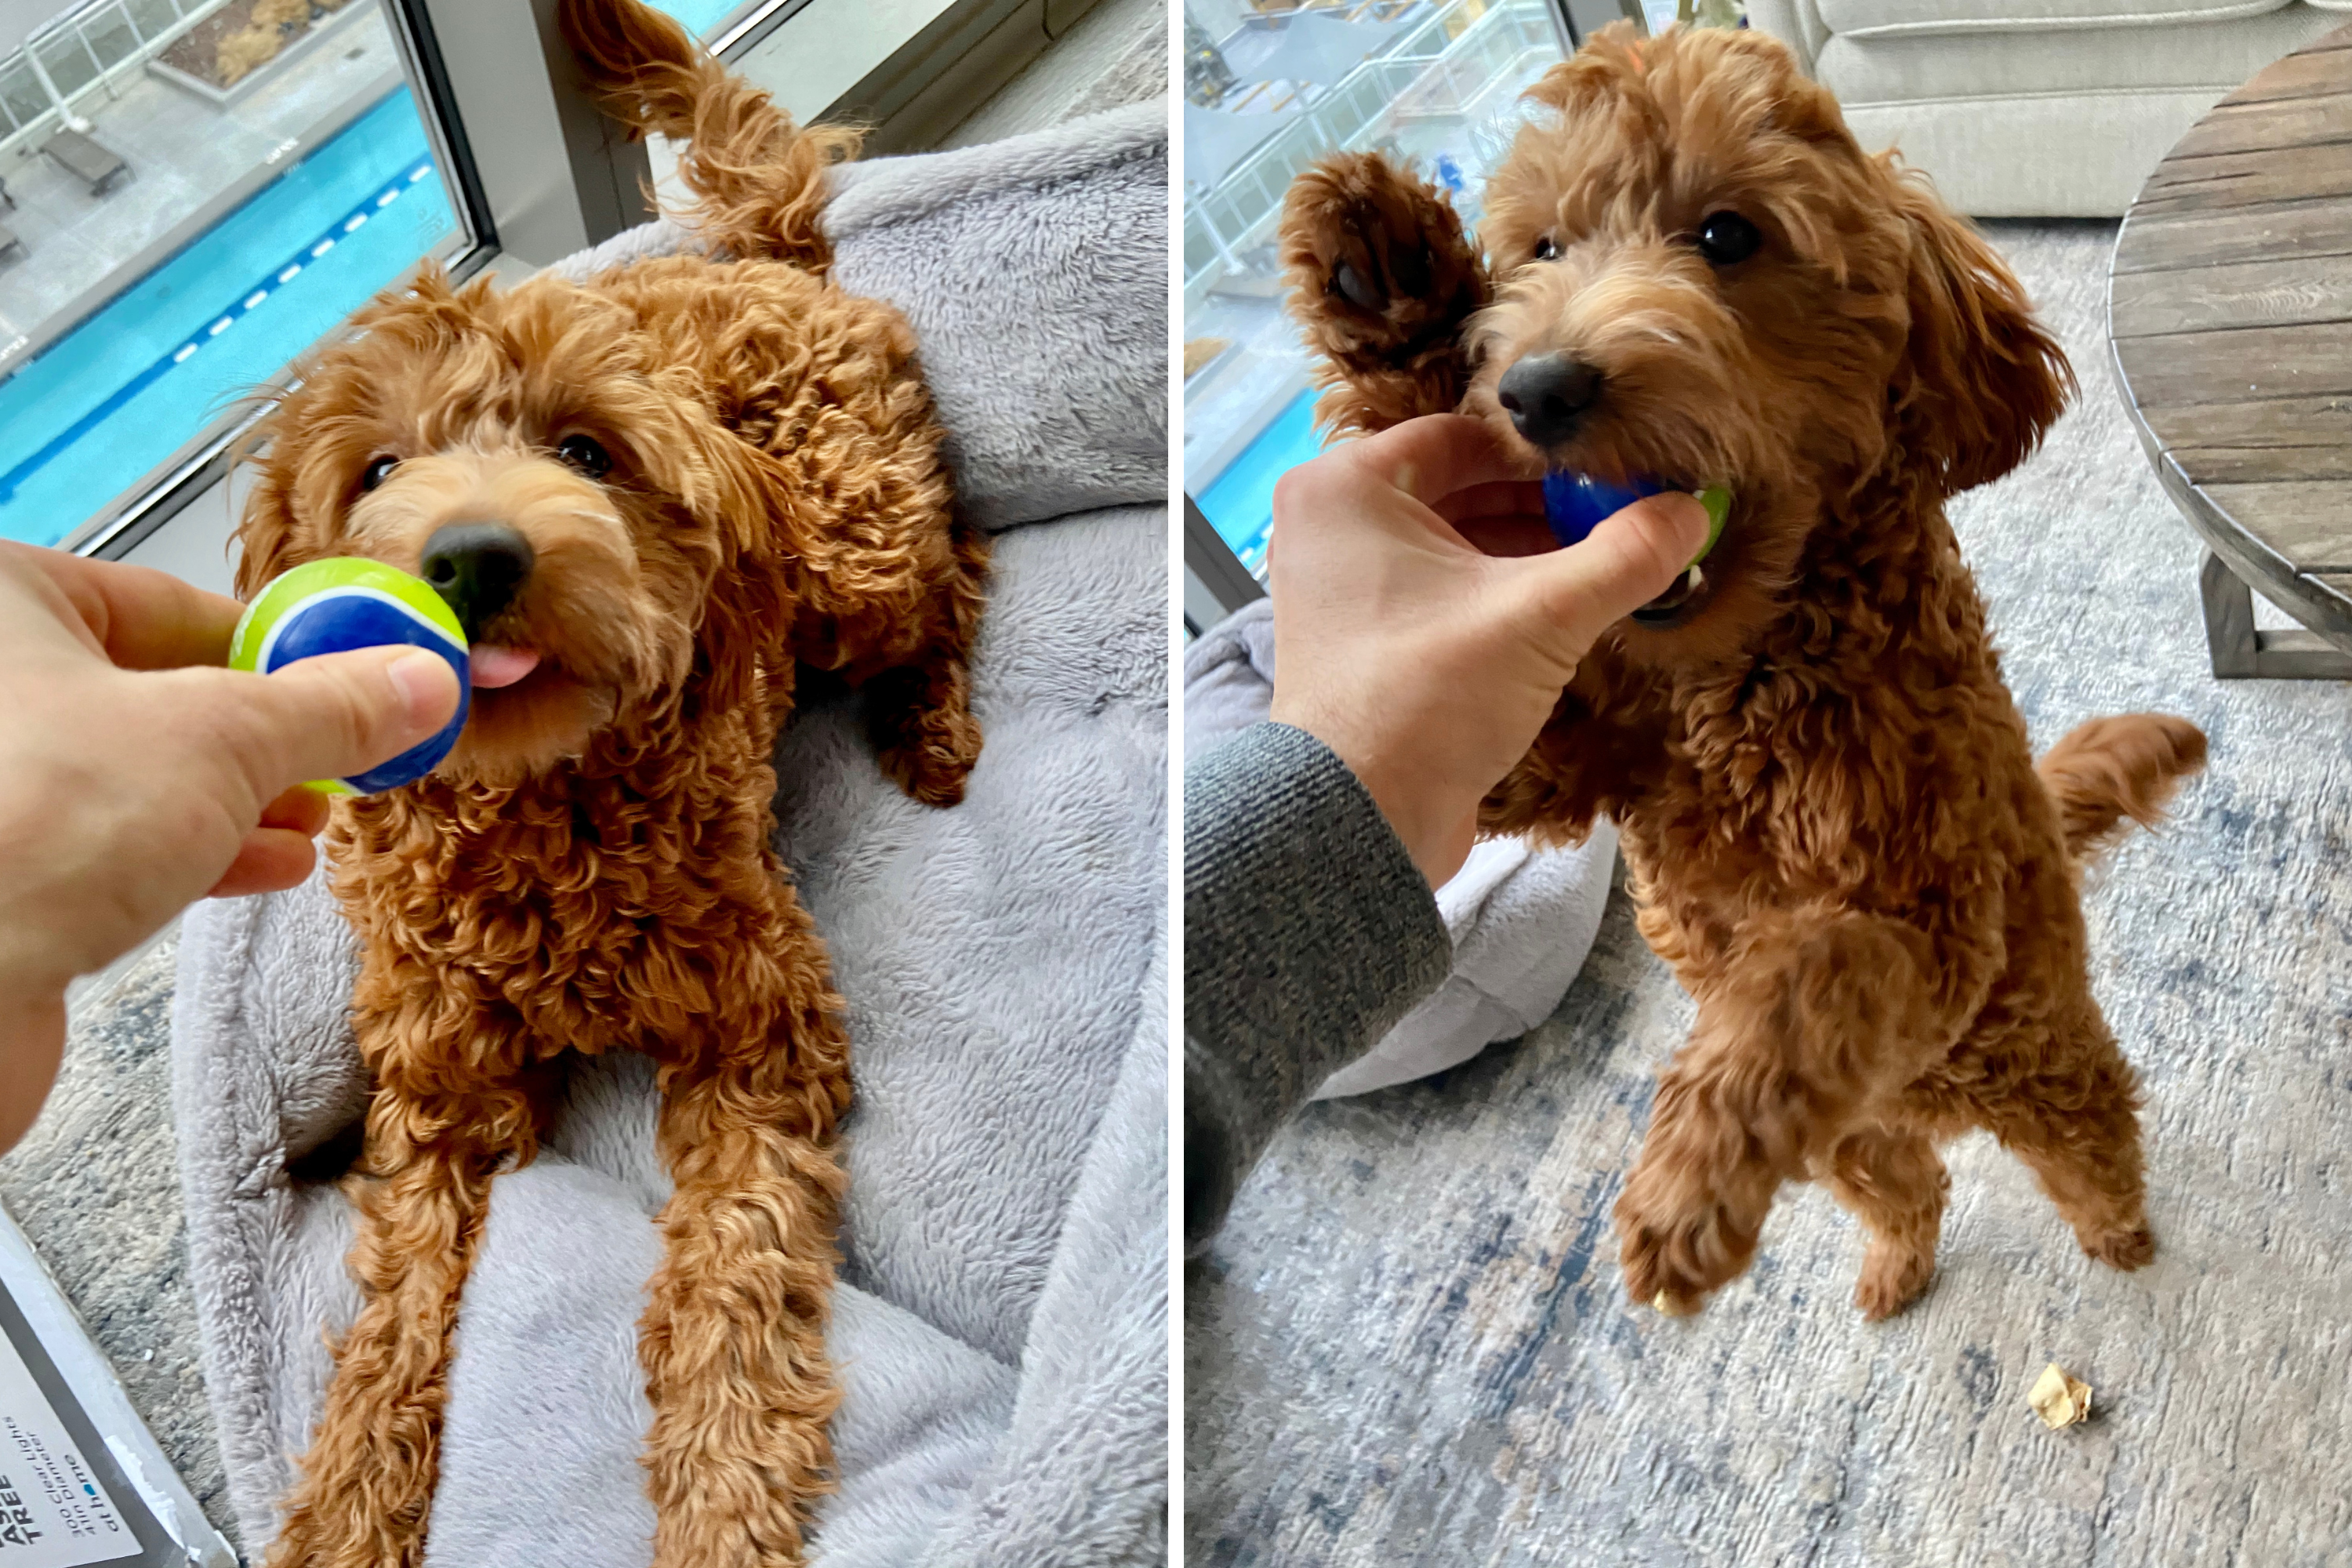 Goldendoodle Struggling to Understand How Toy Works Watched by Over 16M